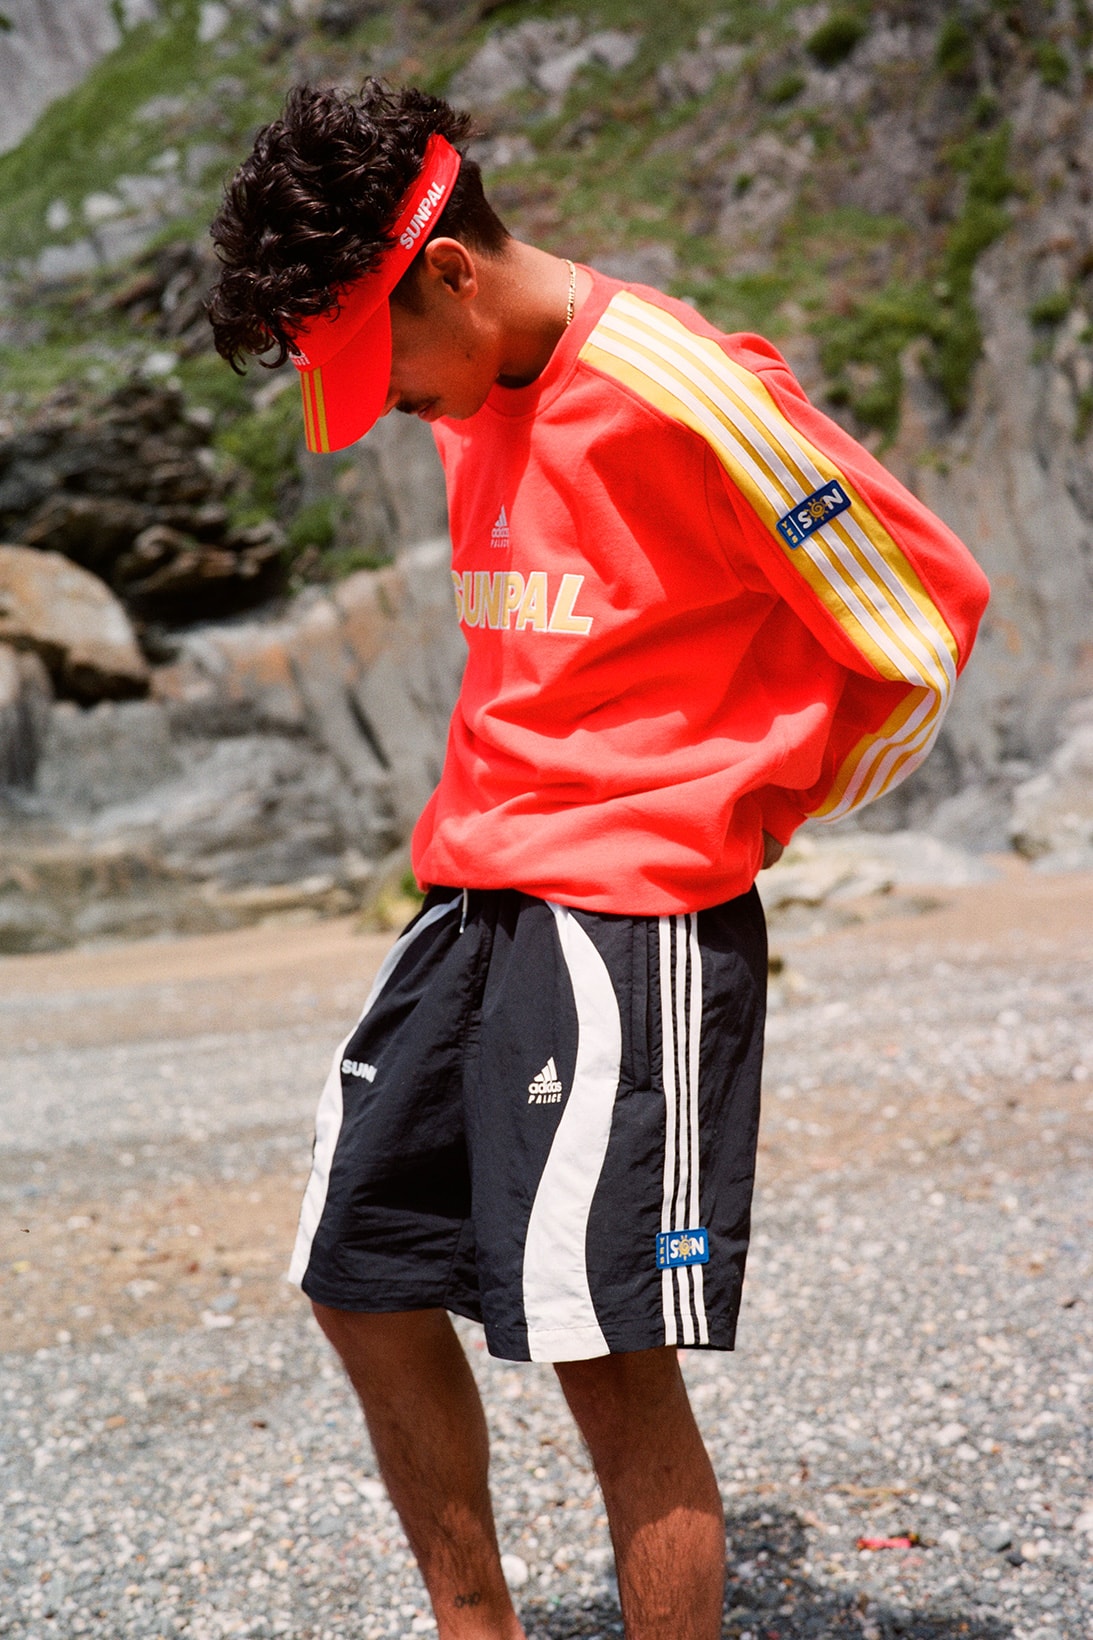 adidas palace sunpal collaboration full lookbook caps goggles t-shirts shorts water shoes release date